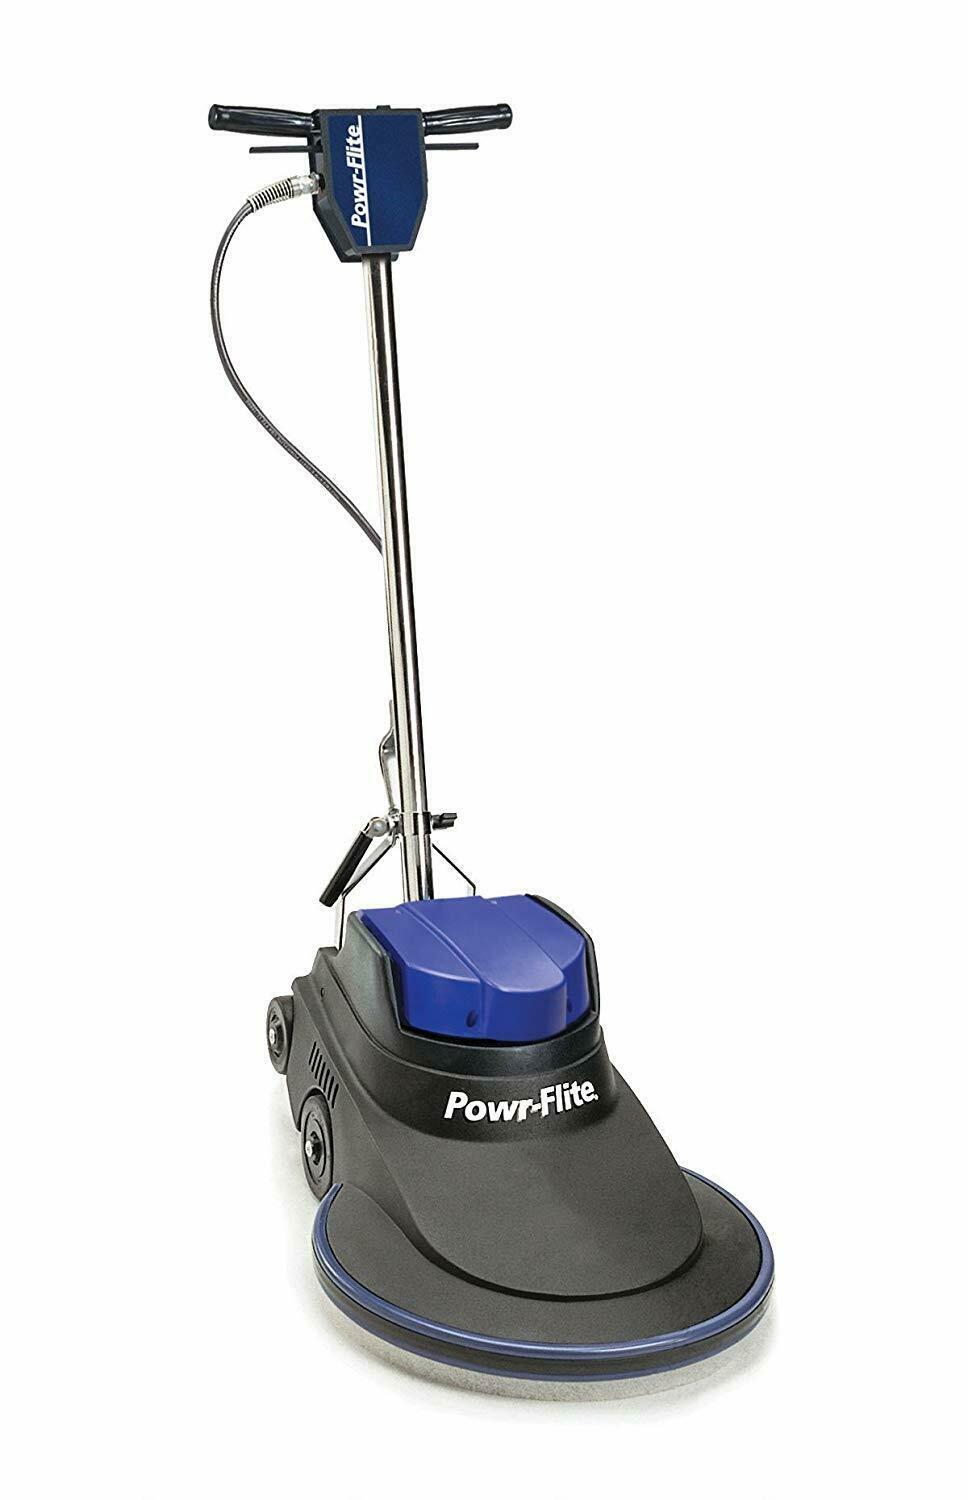 Powr-Flite NM1600 Millennium Edition Electric Burnisher with Power Cord, 1600 RPM